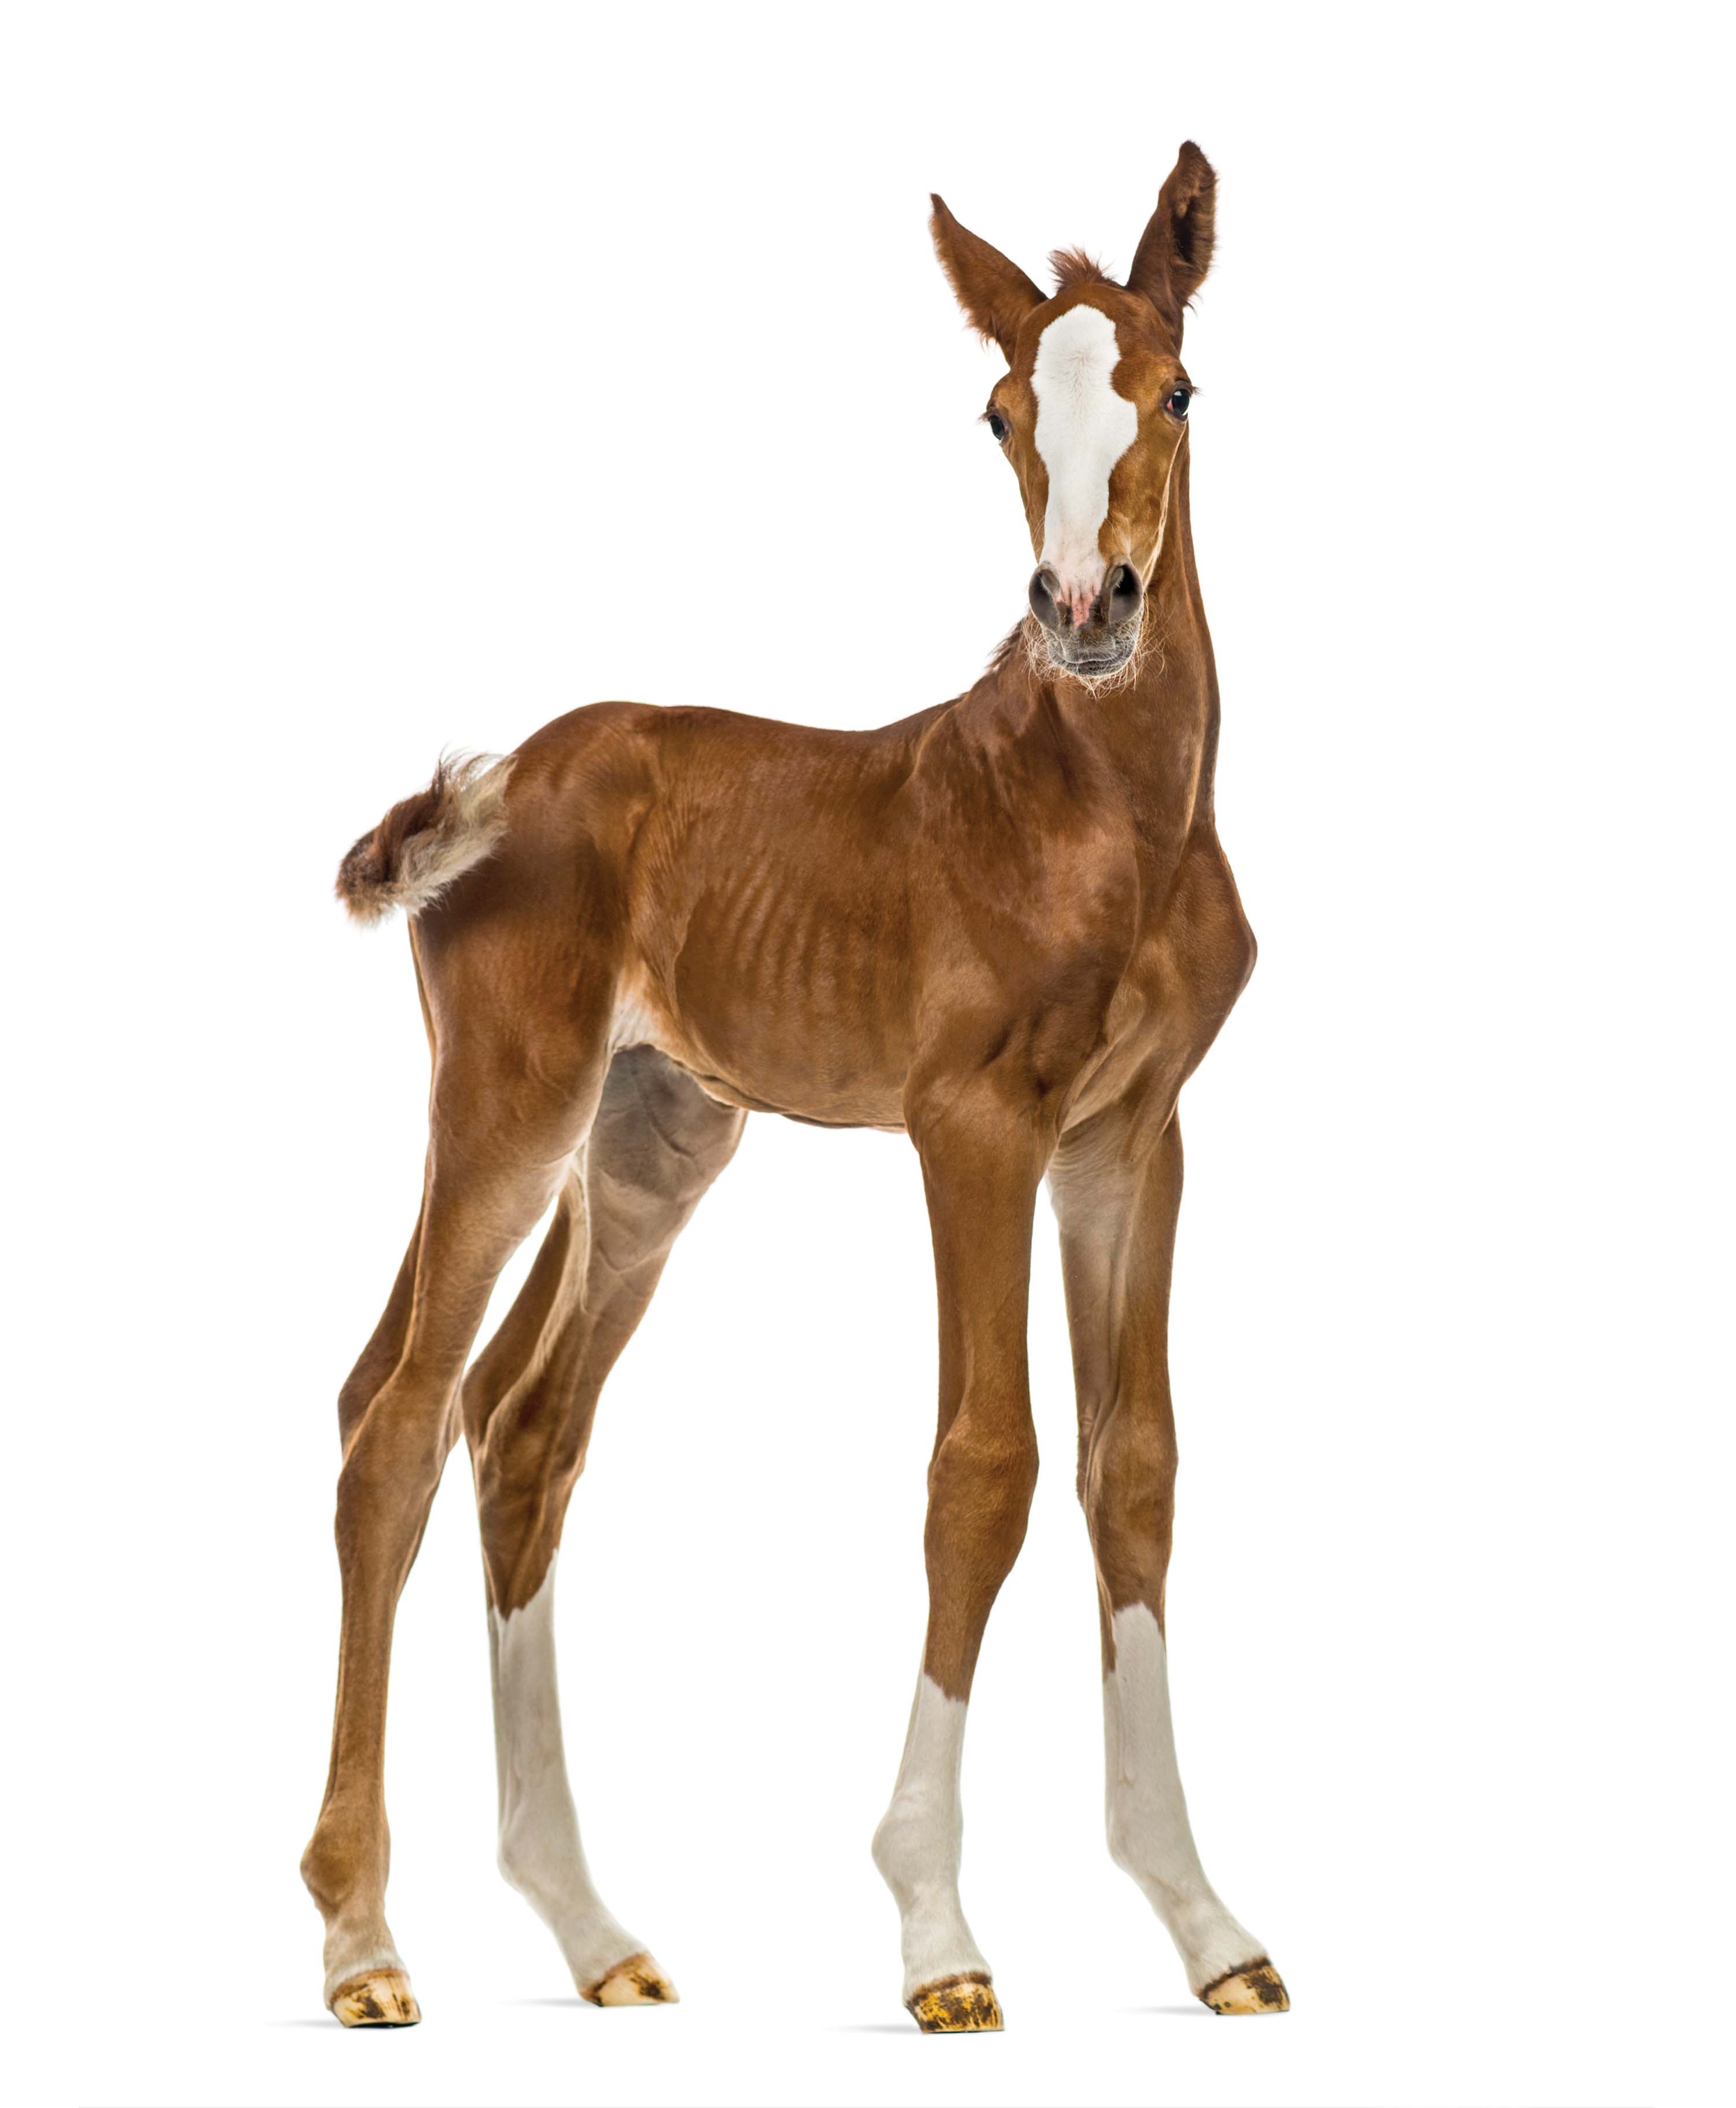 Although as many as 13% of foals don’t have straight limbs within the first 10 days, most spontaneously correct themselves with time and growth. 